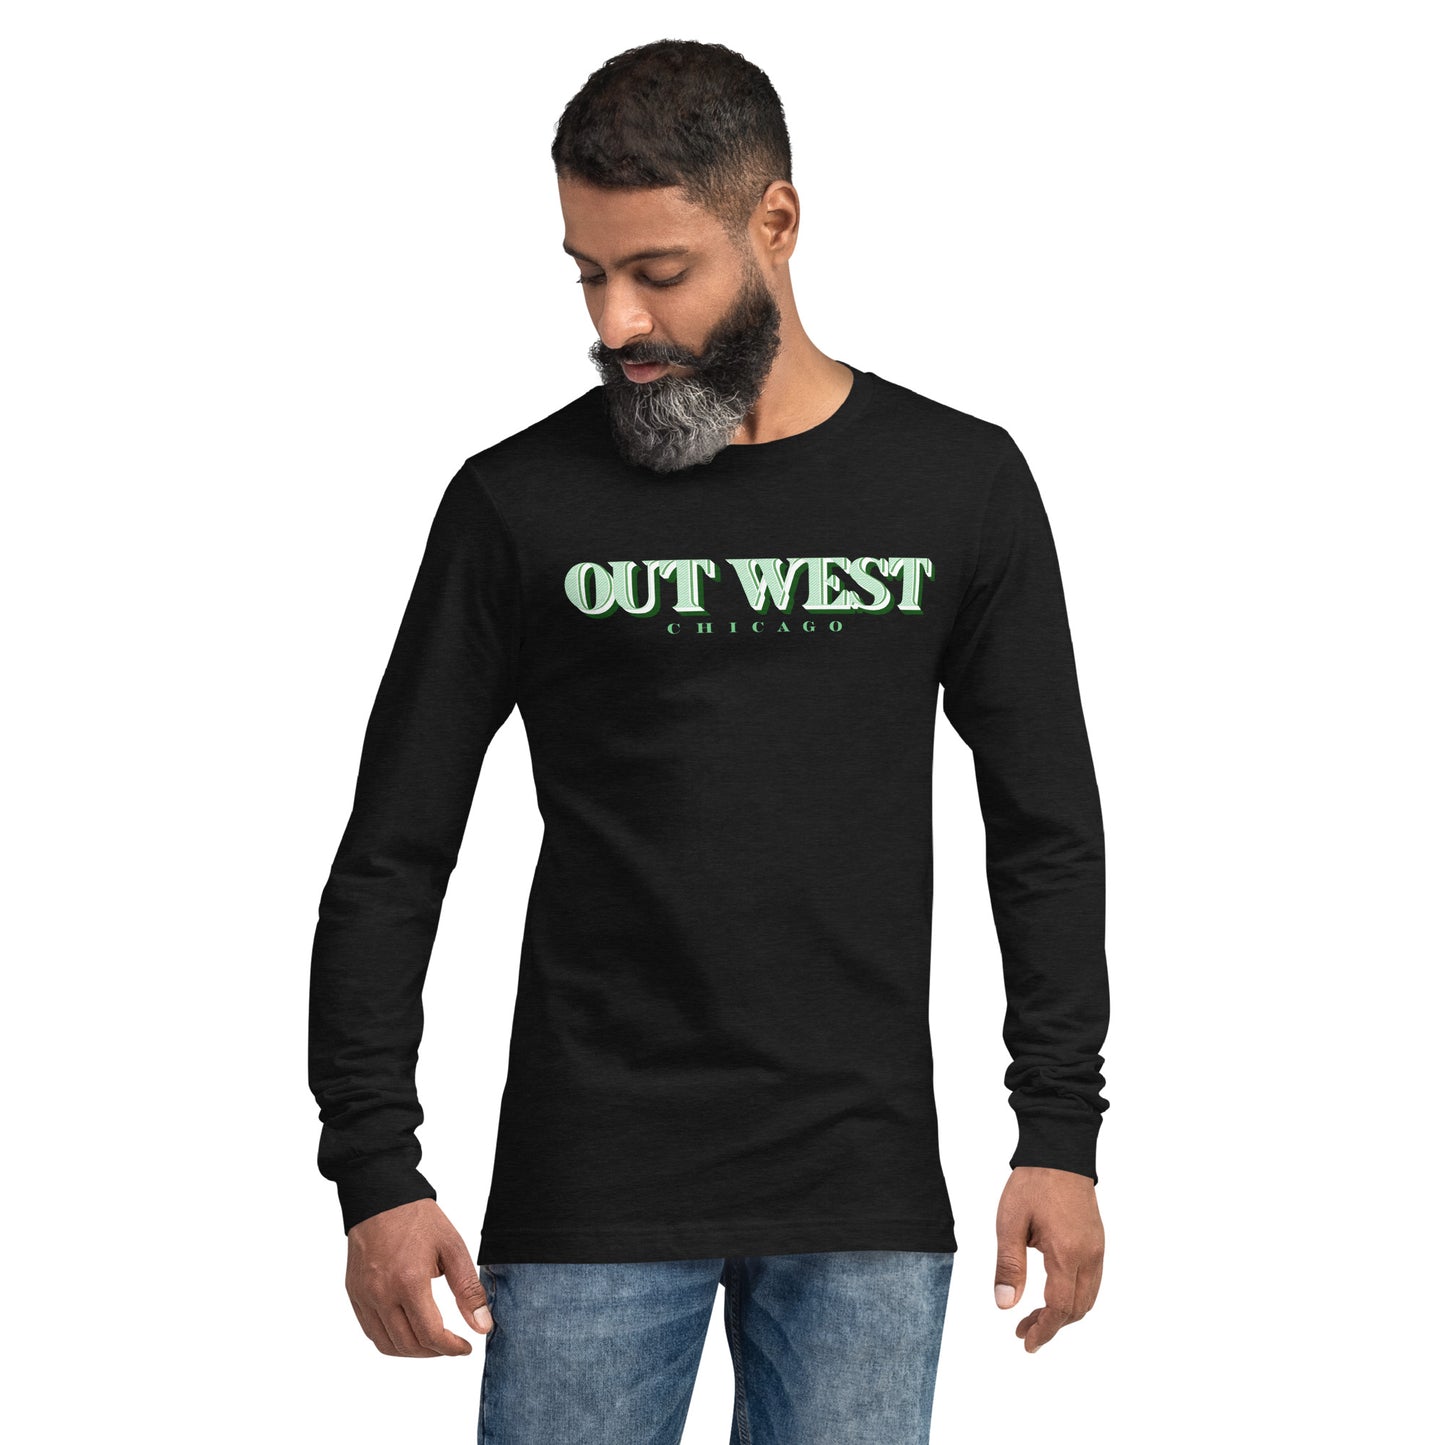 OUT WEST CHICAGO Men's Long Sleeve Tee